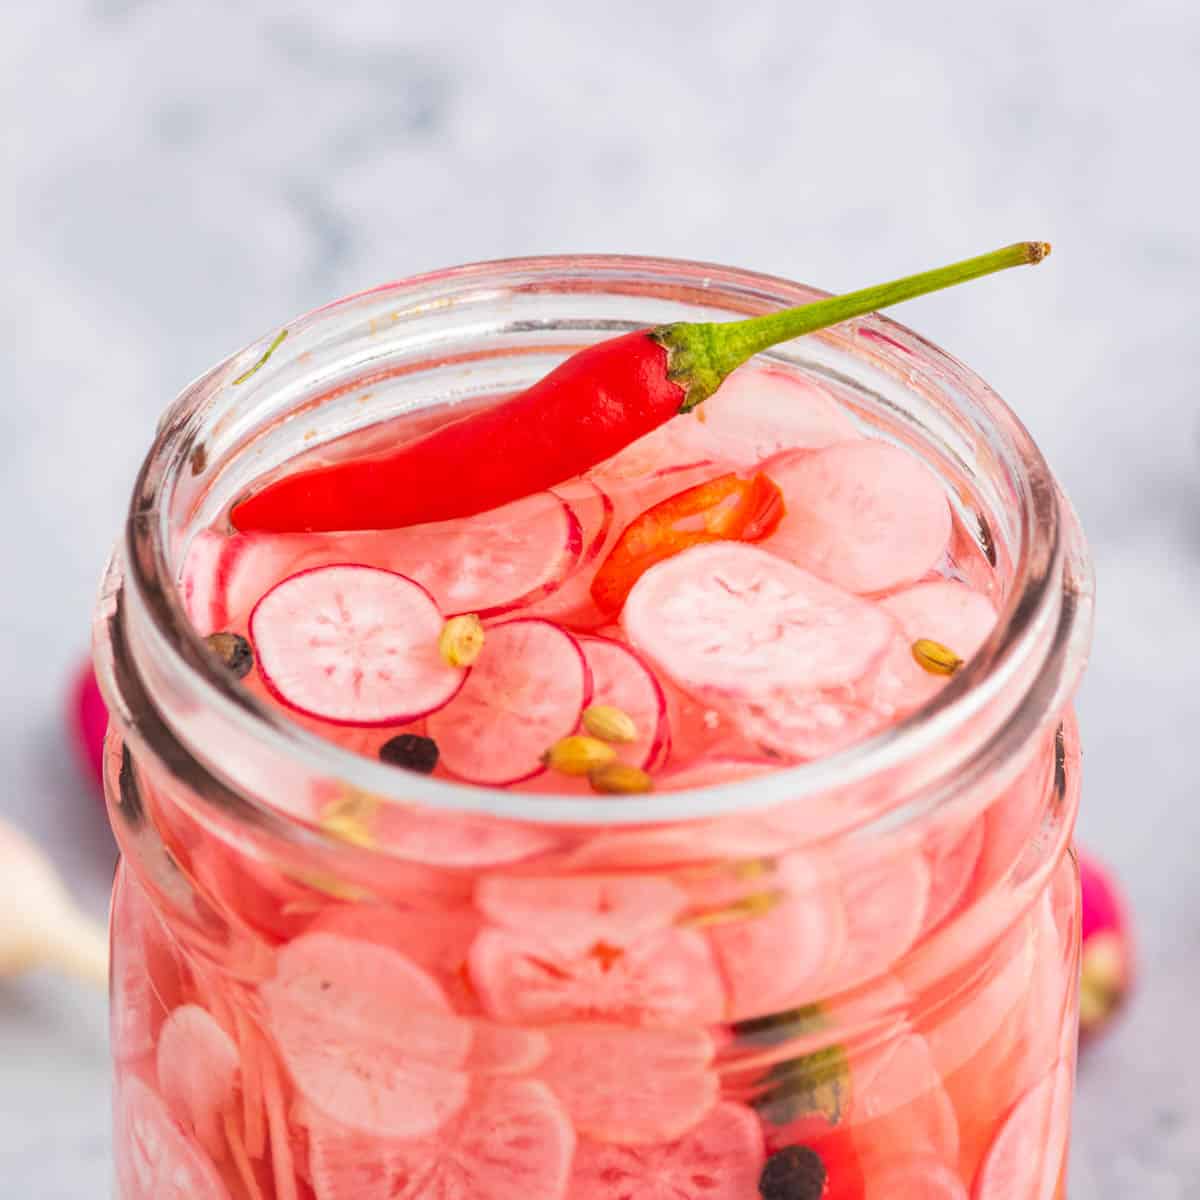 The top of an open glass jar filled with sliced radishes, red chili pepper, peppercorns, and coriander seeds.